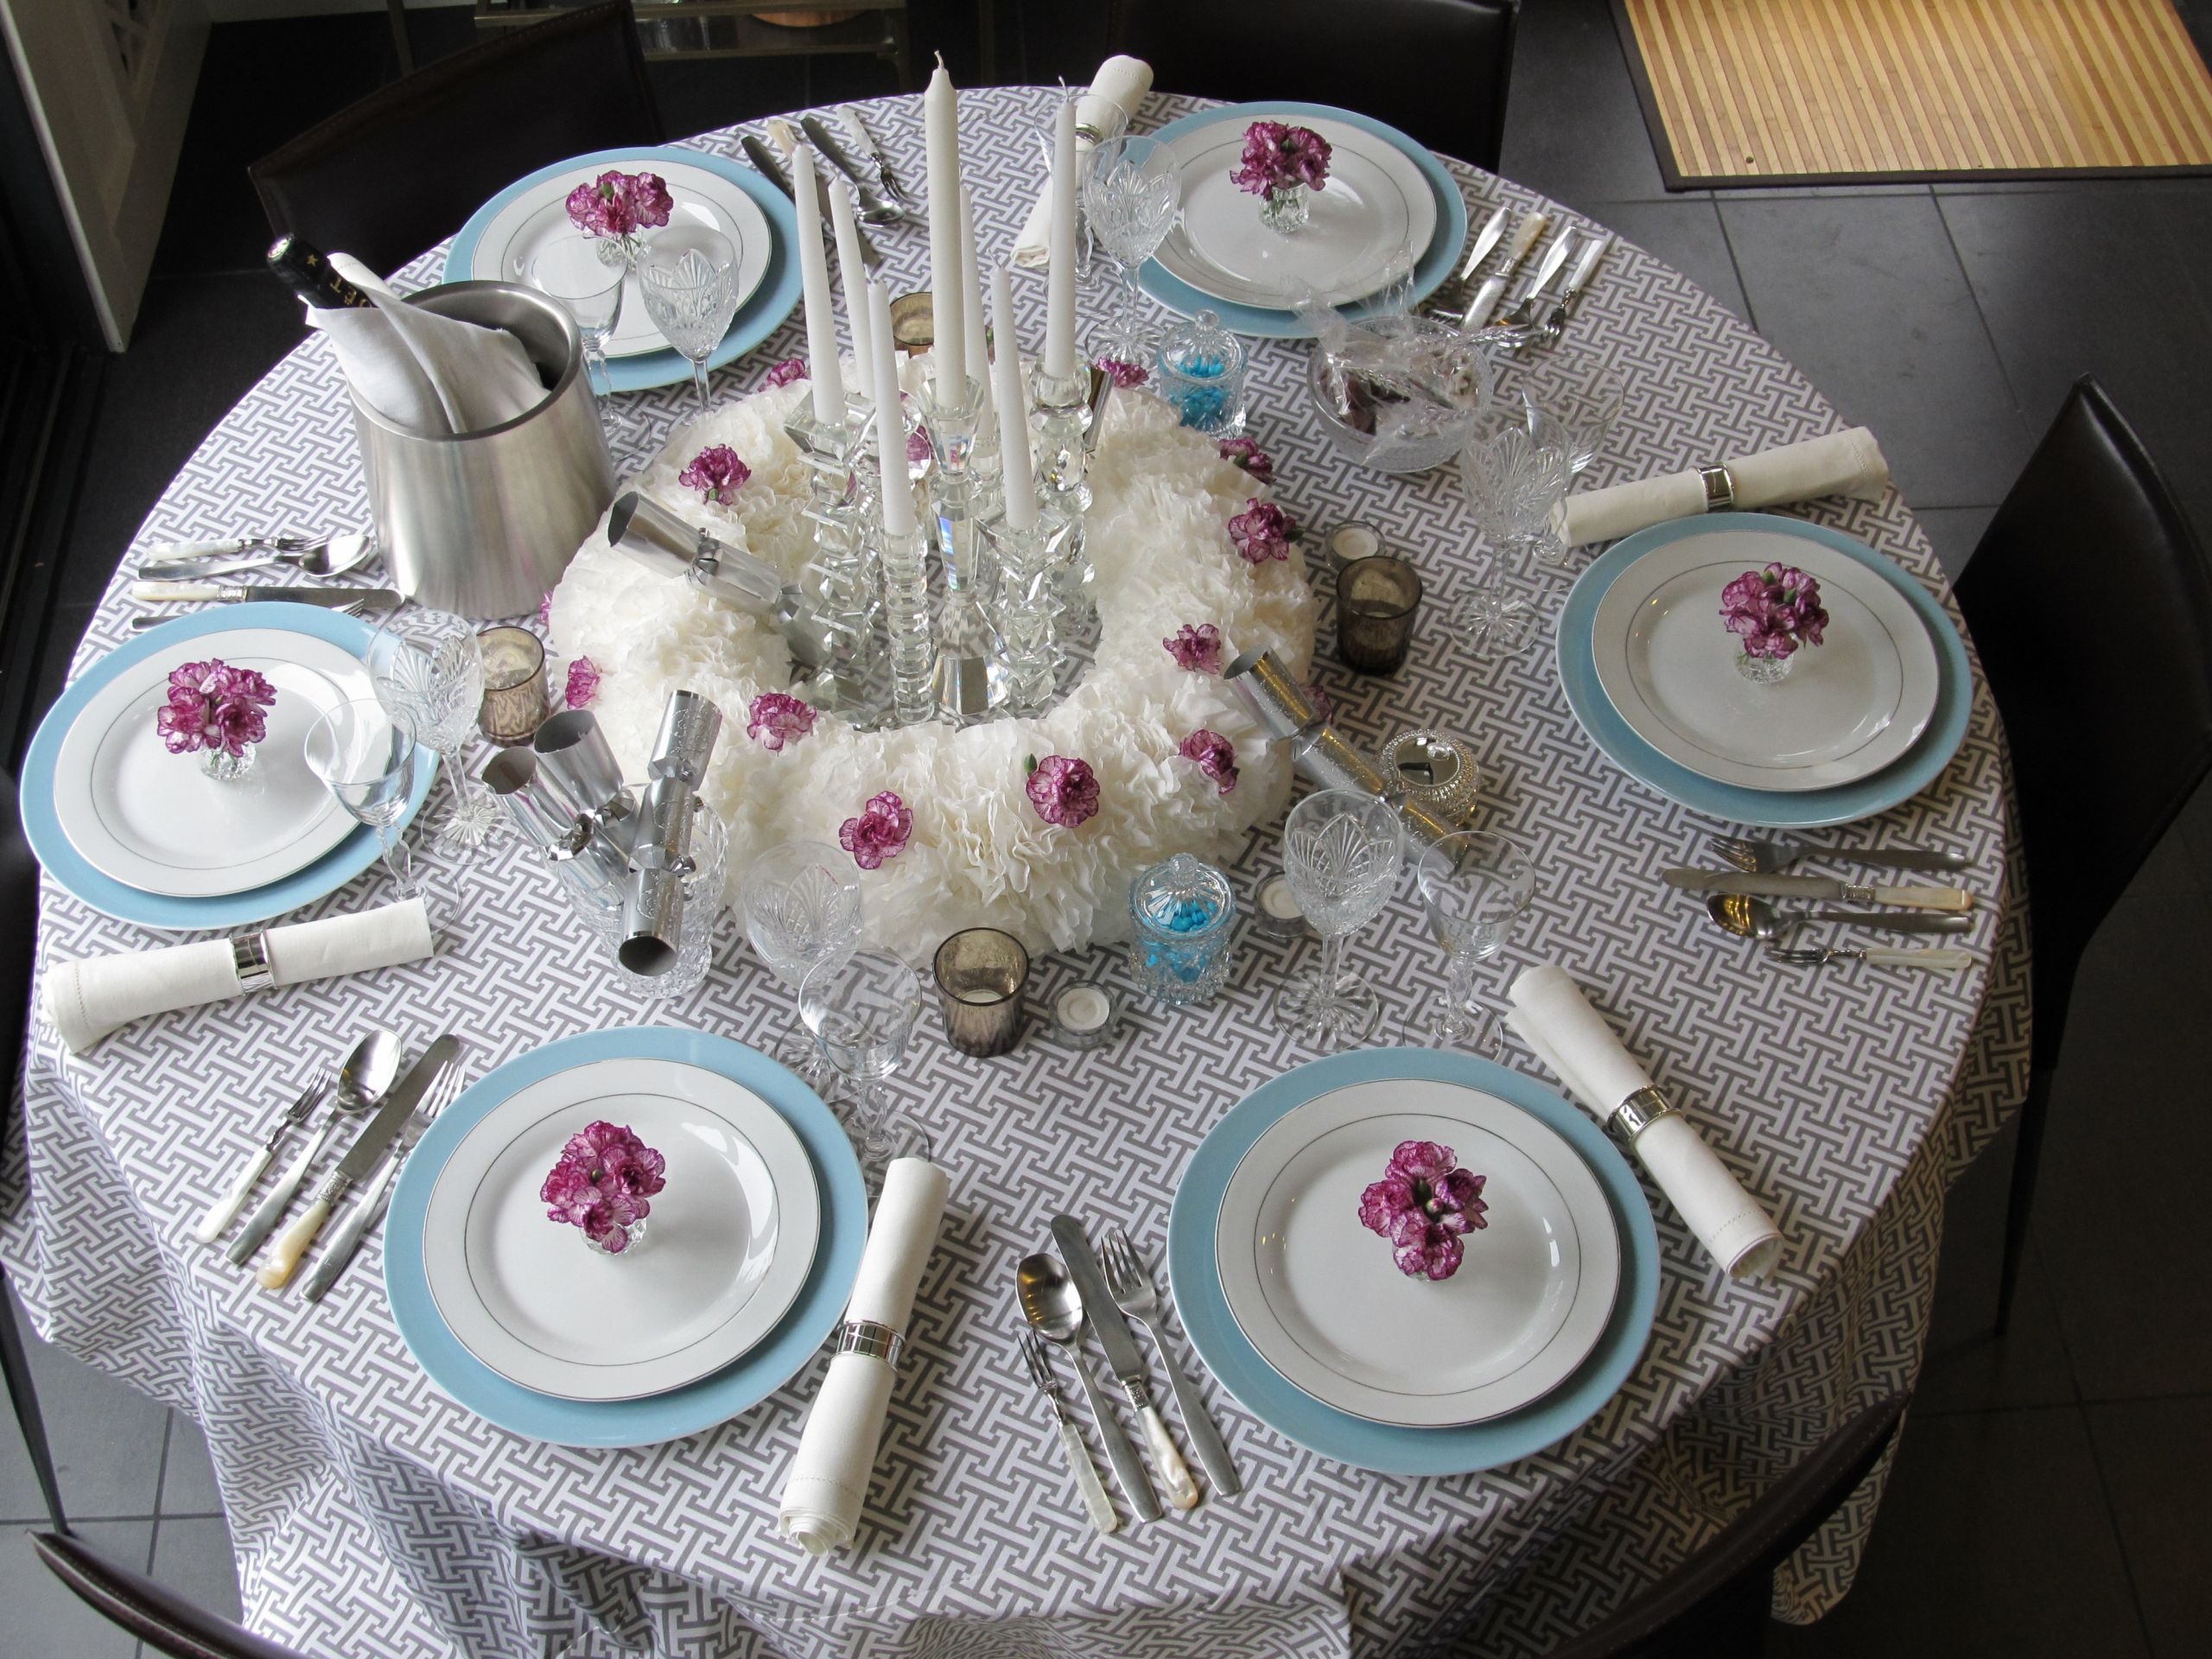 Dinner Party Table Settings Ideas
 New Year’s Eve Dinner Party Table Setting